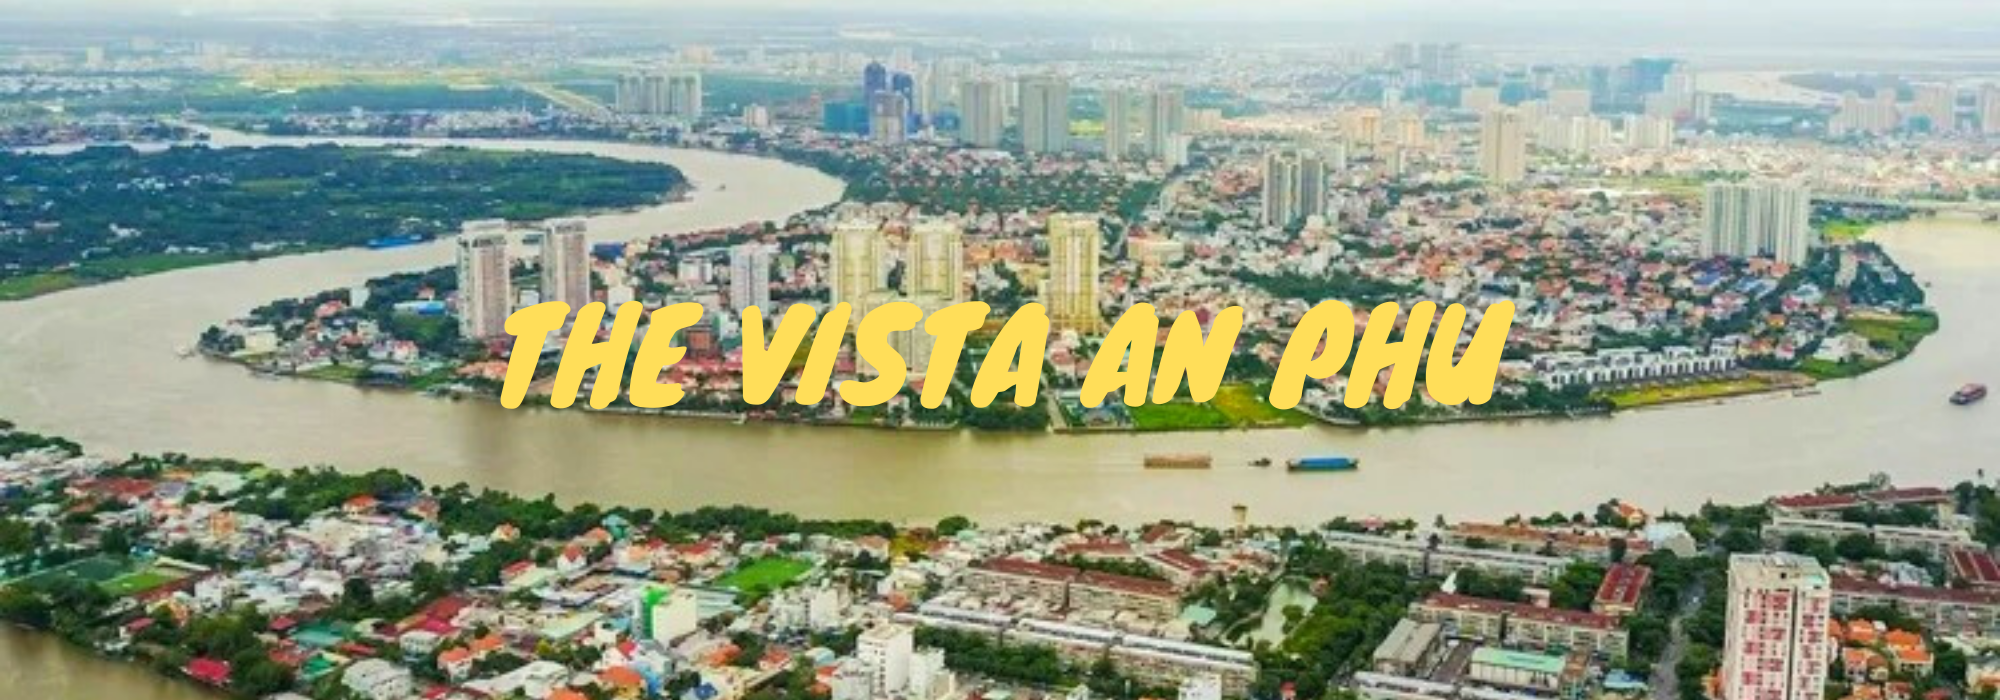 The Vista An Phu 3 Bedroom For Sale-River View